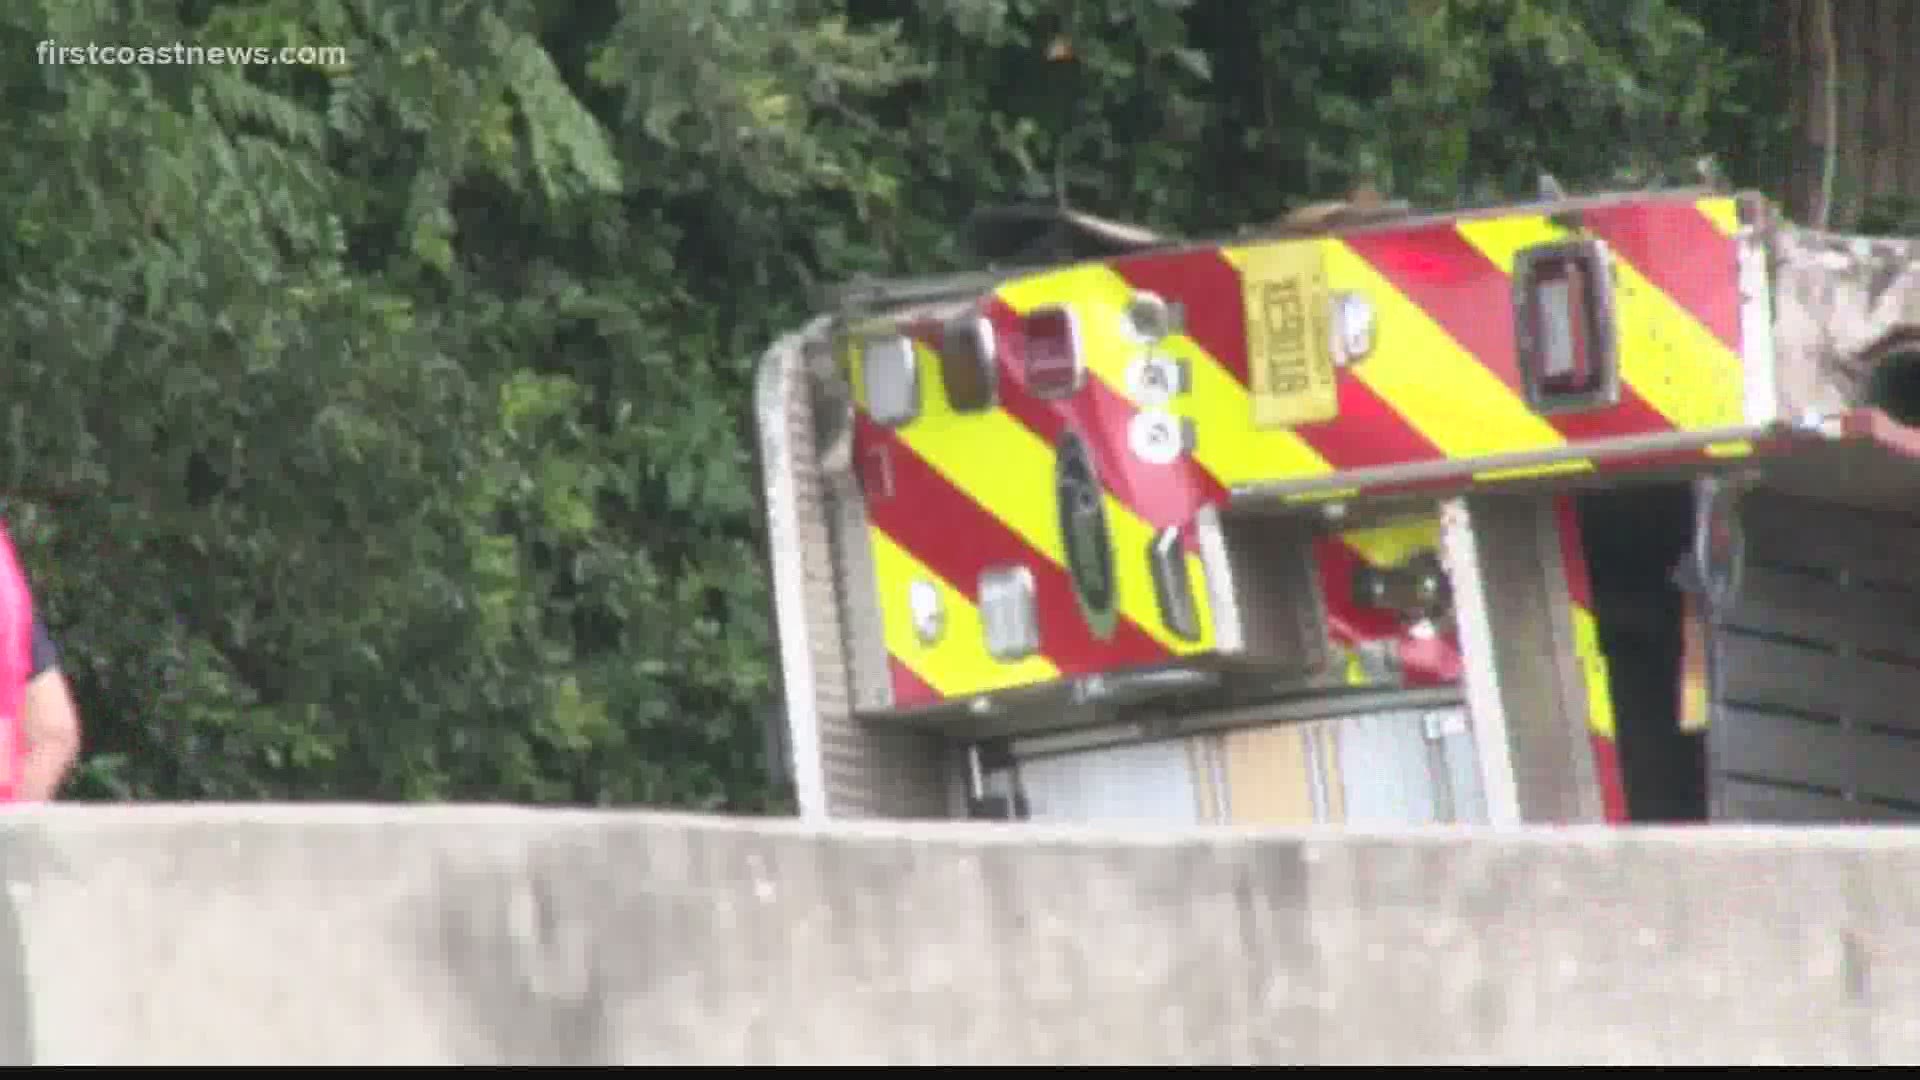 Three firefighters with the Jacksonville Fire and Rescue Department were injured following a crash on Interstate 95 southbound near Emerson Street.